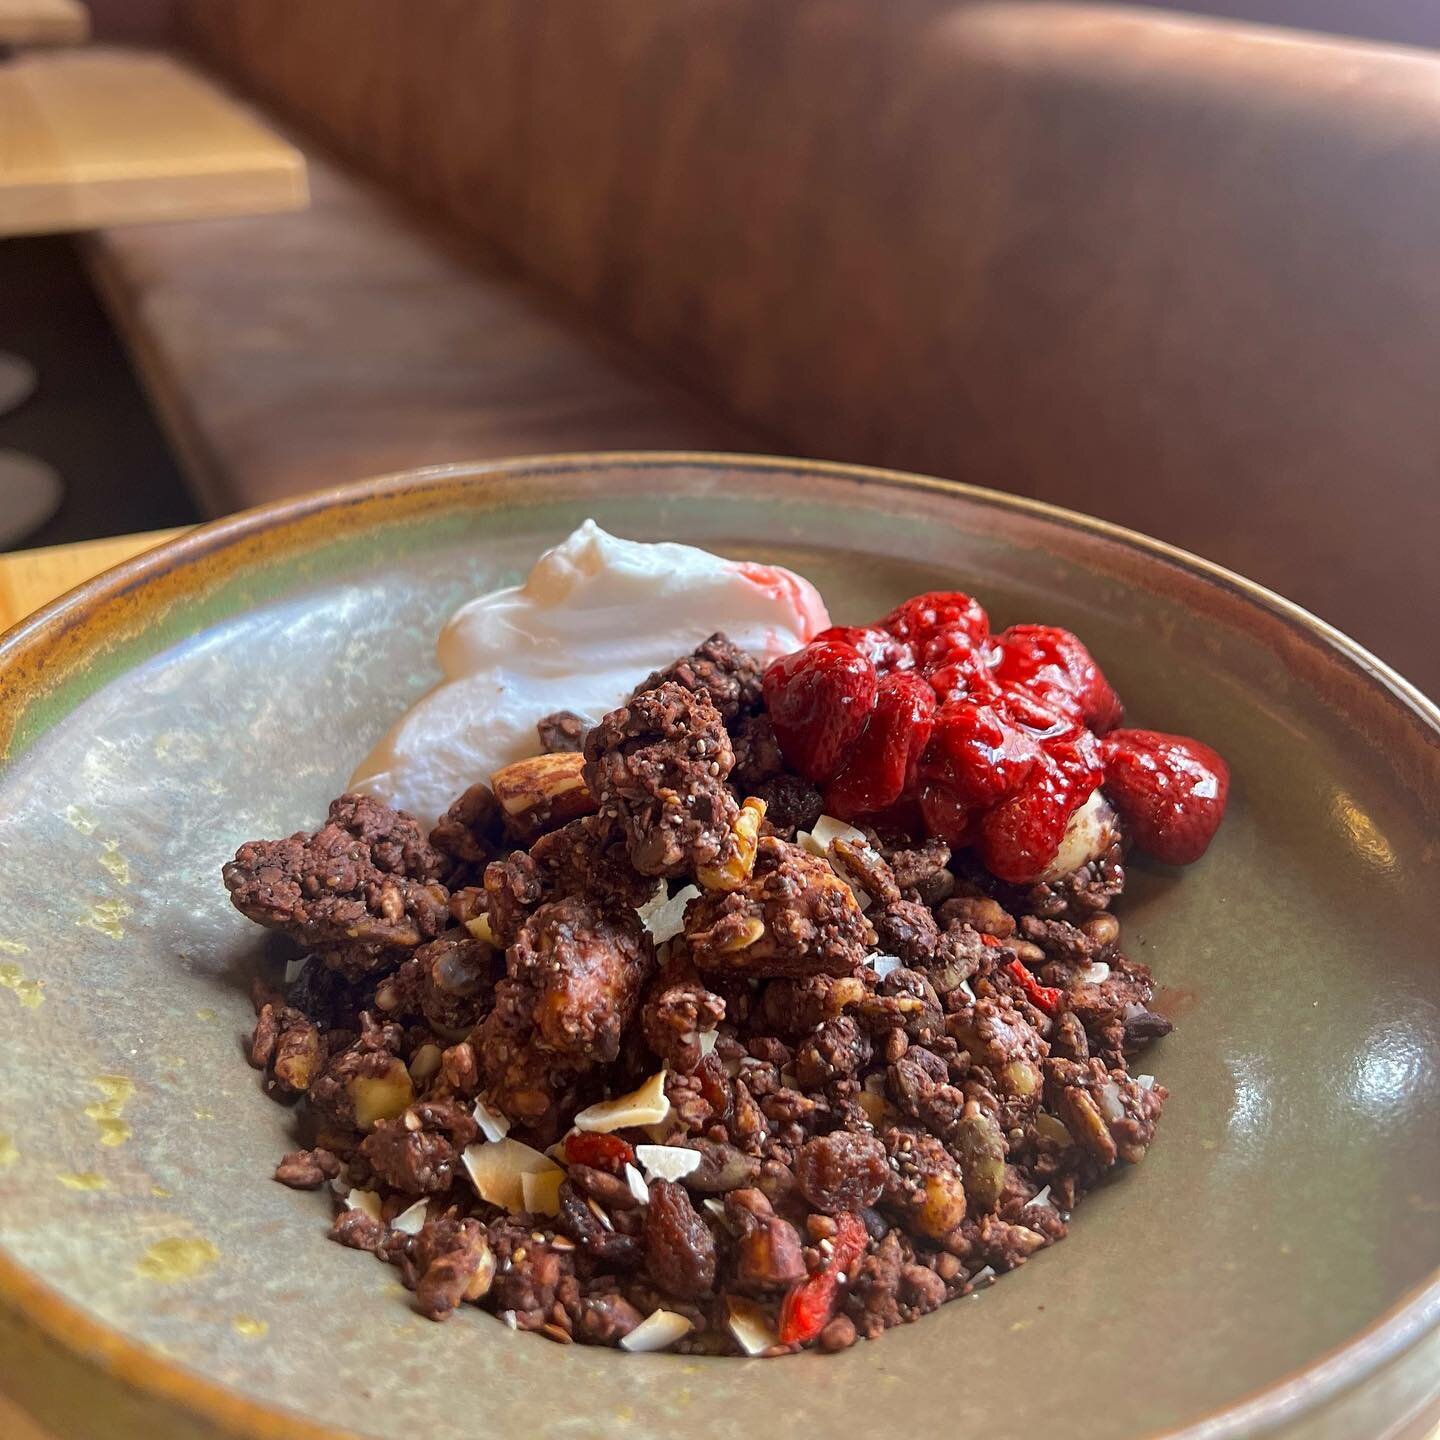 Our house baked cacao granola is an August Team favourite with crunchy whole nuts served with your choice of coconut or Greek yoghurt and added roast strawberries. Available on the breakfast menu till 11:30AM!